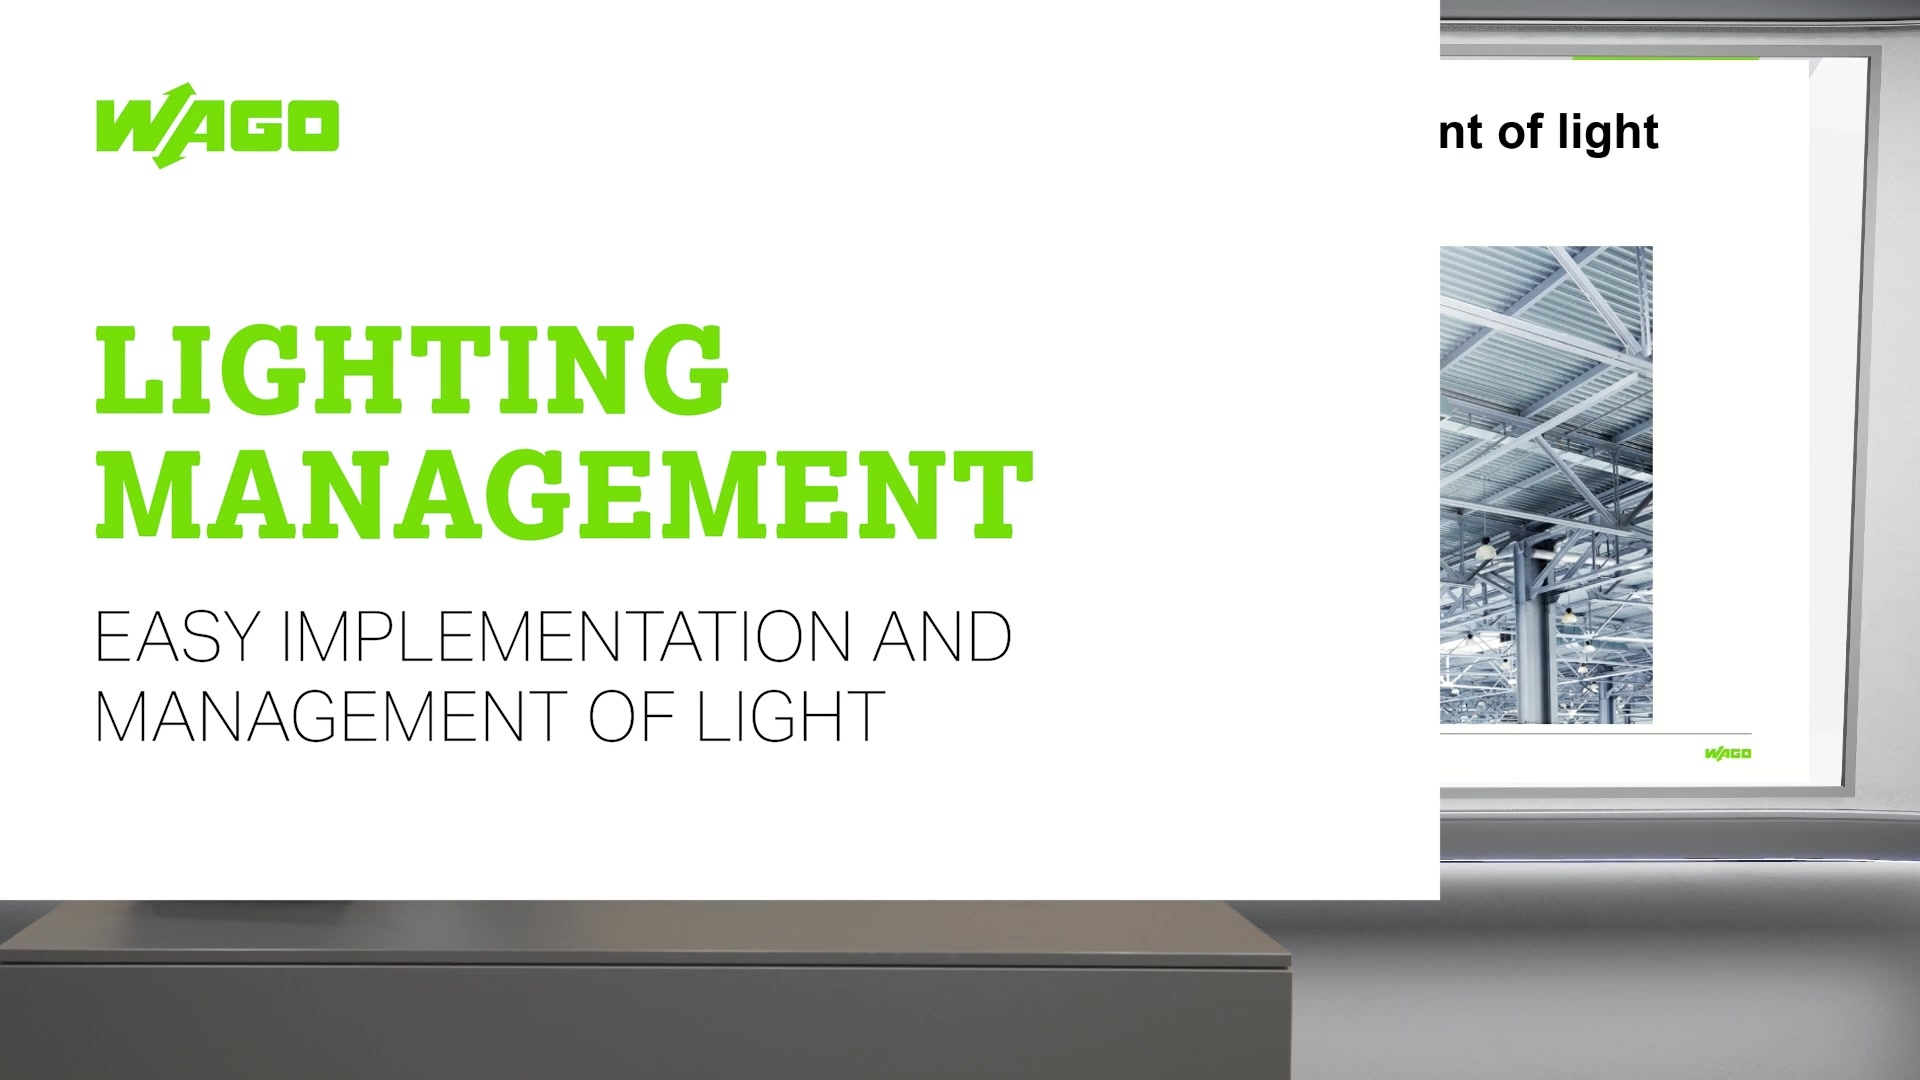 Easy implementation and management of light